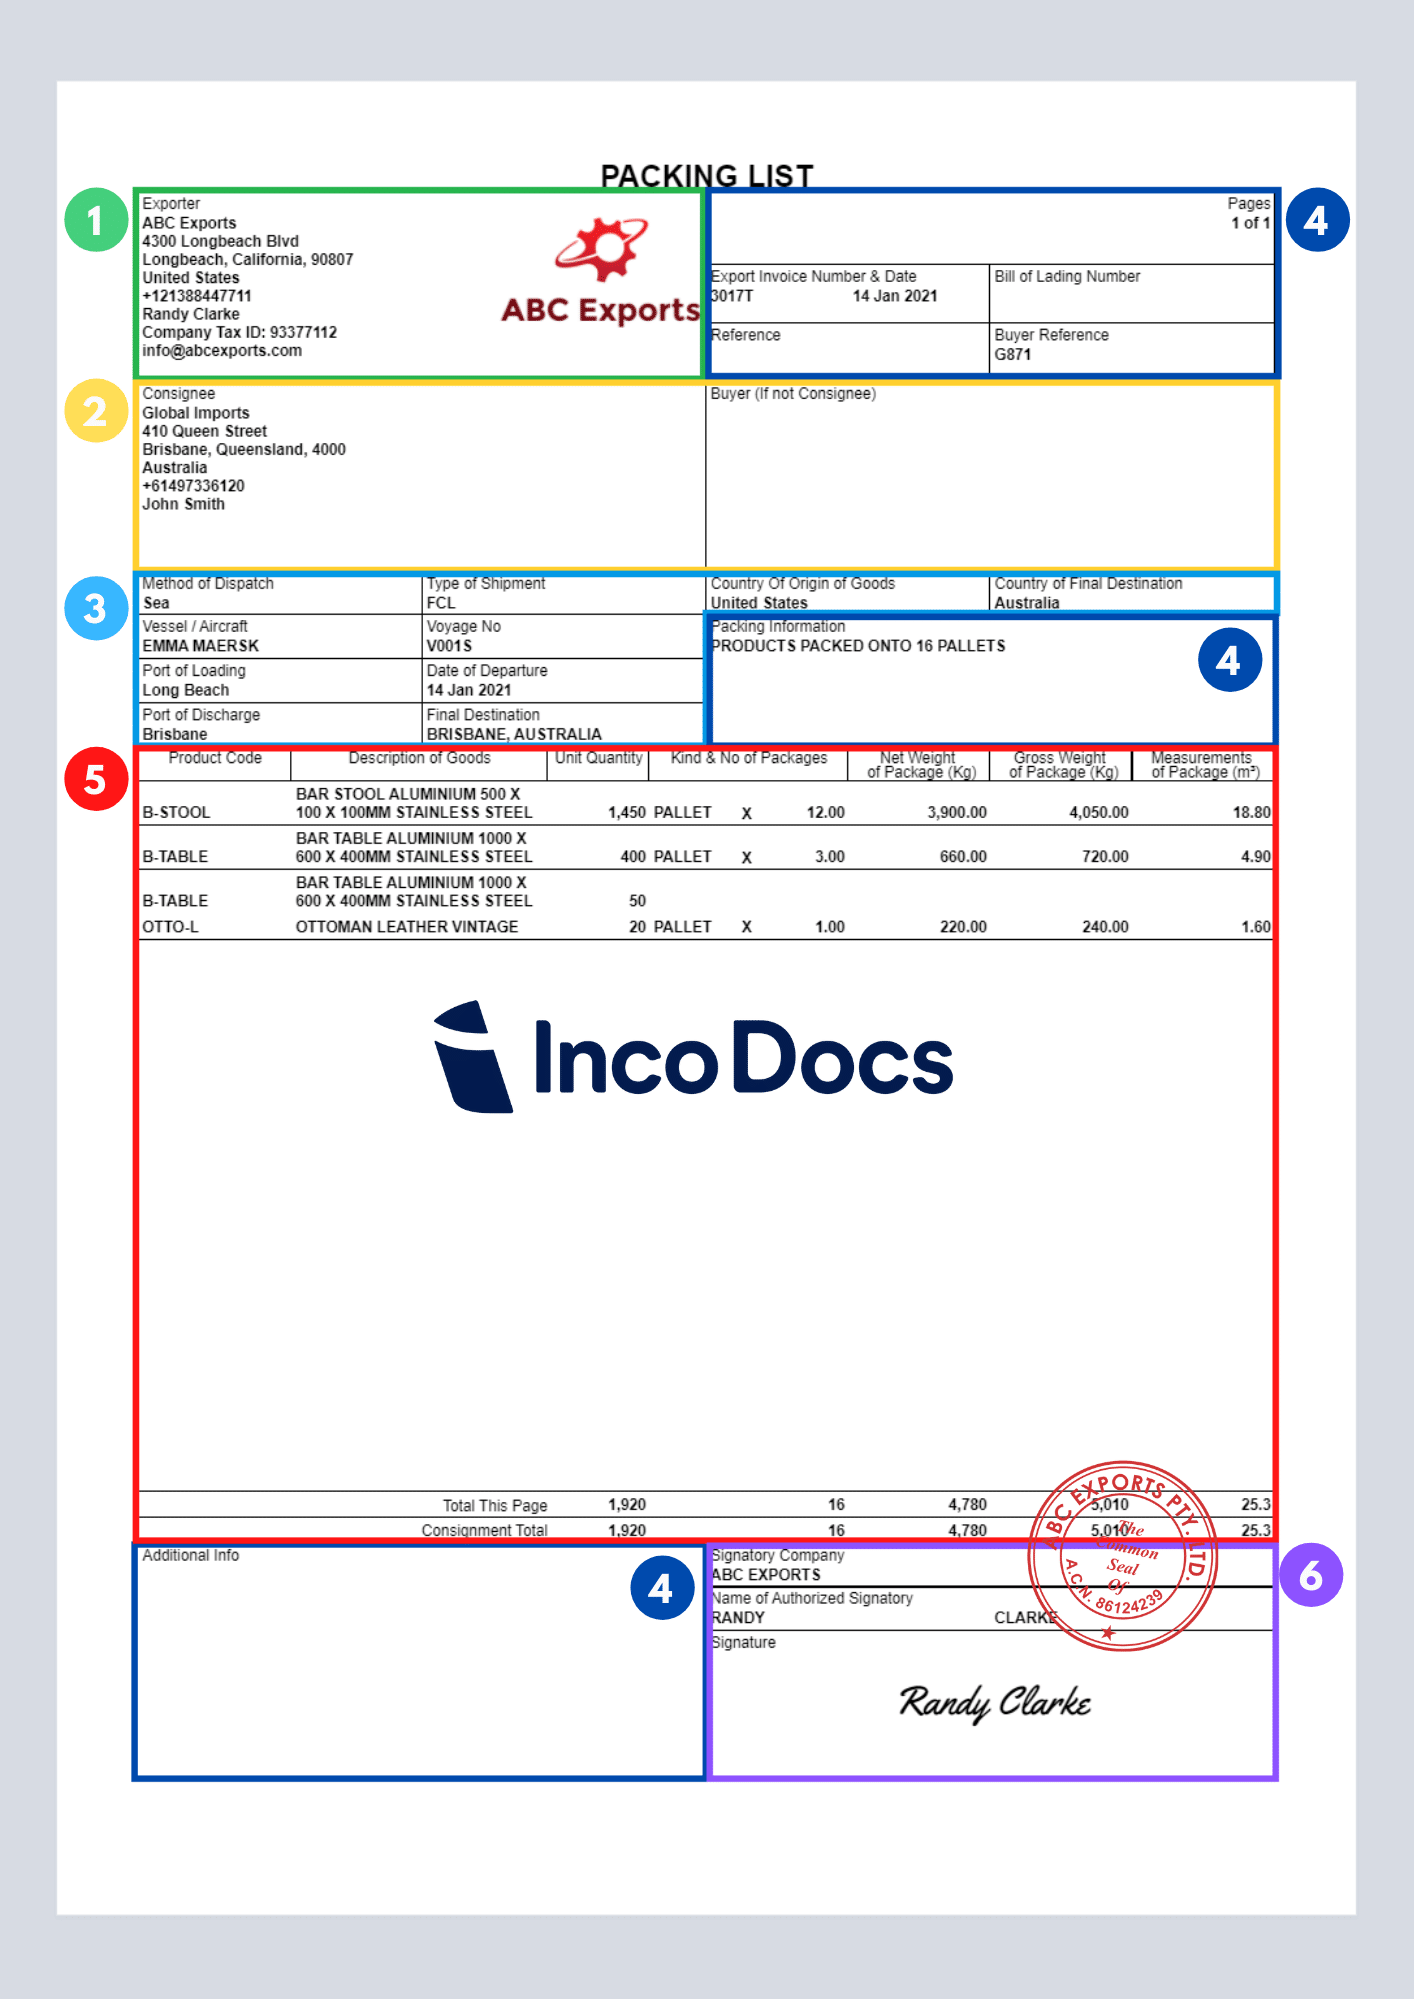 How to Create and Download a Packing List for Export Shipments In Commercial Invoice Packing List Template